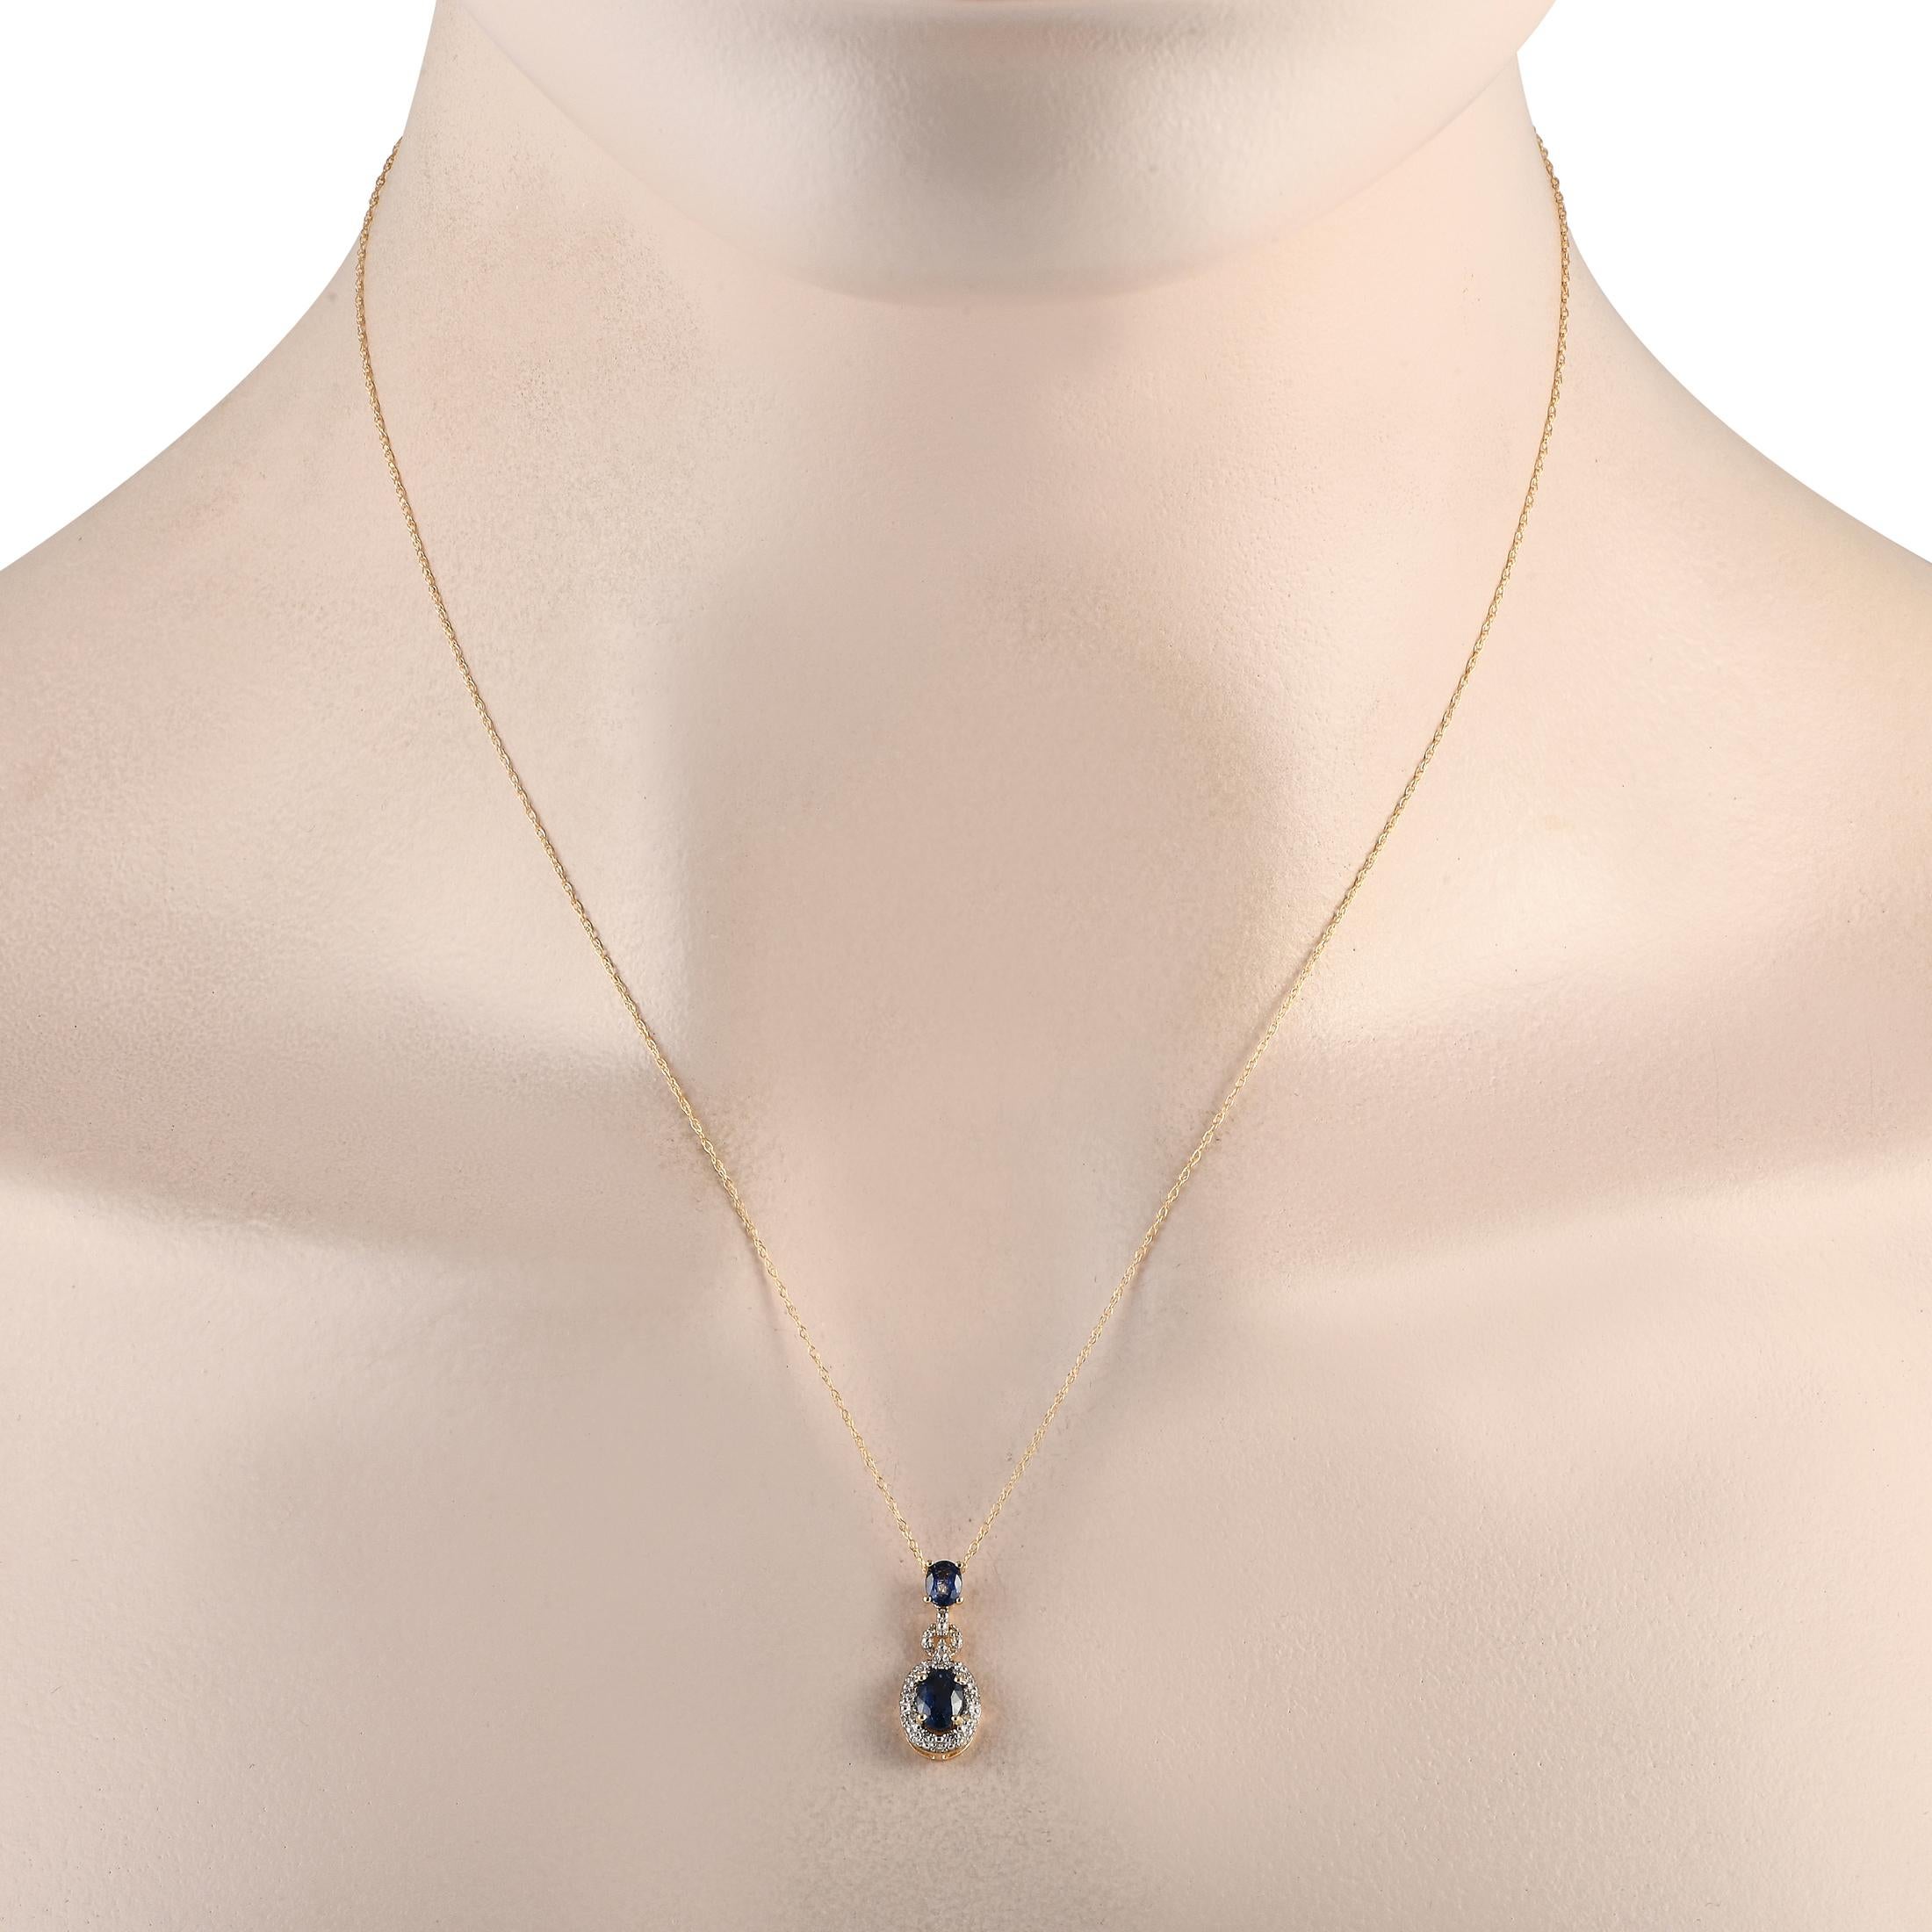 Elevate the glam factor of a cocktail attire with this diamond and sapphire necklace. It has the perfect combination of brilliance and sophistication, thanks to the two oval sapphires and the diamond halos. The pendant measures less than an inch in